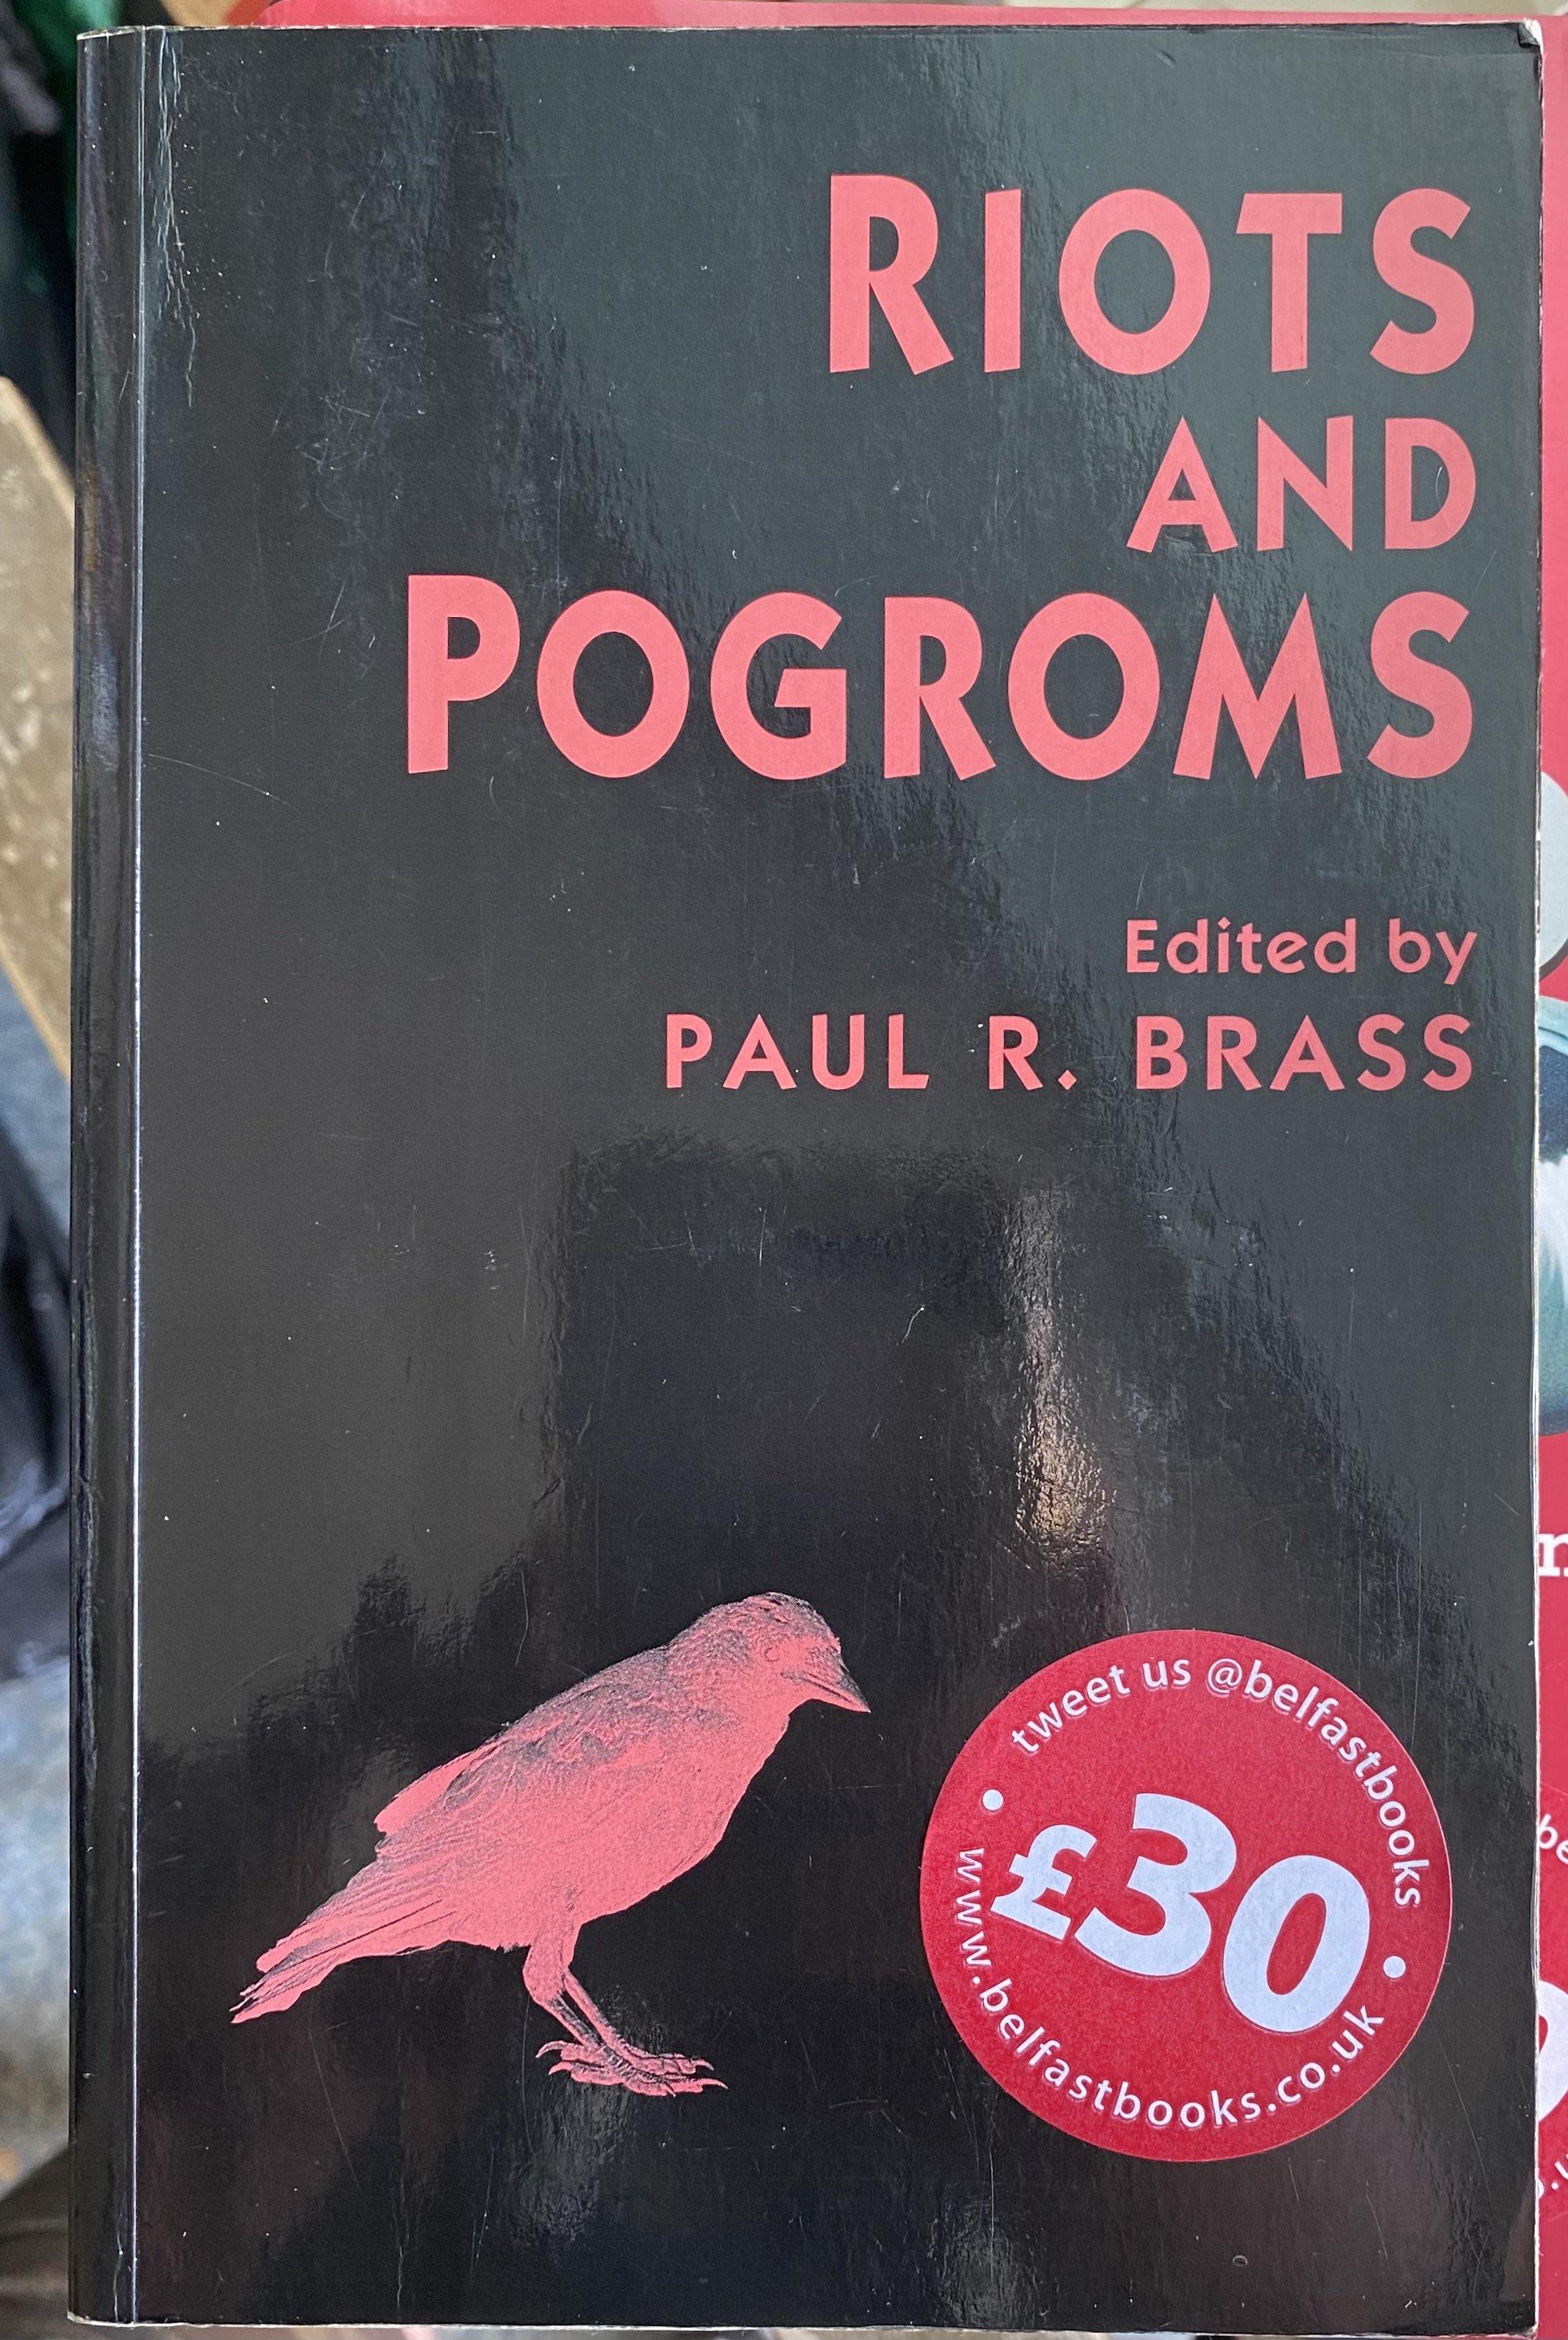 Riots and Pograms - Belfast Books